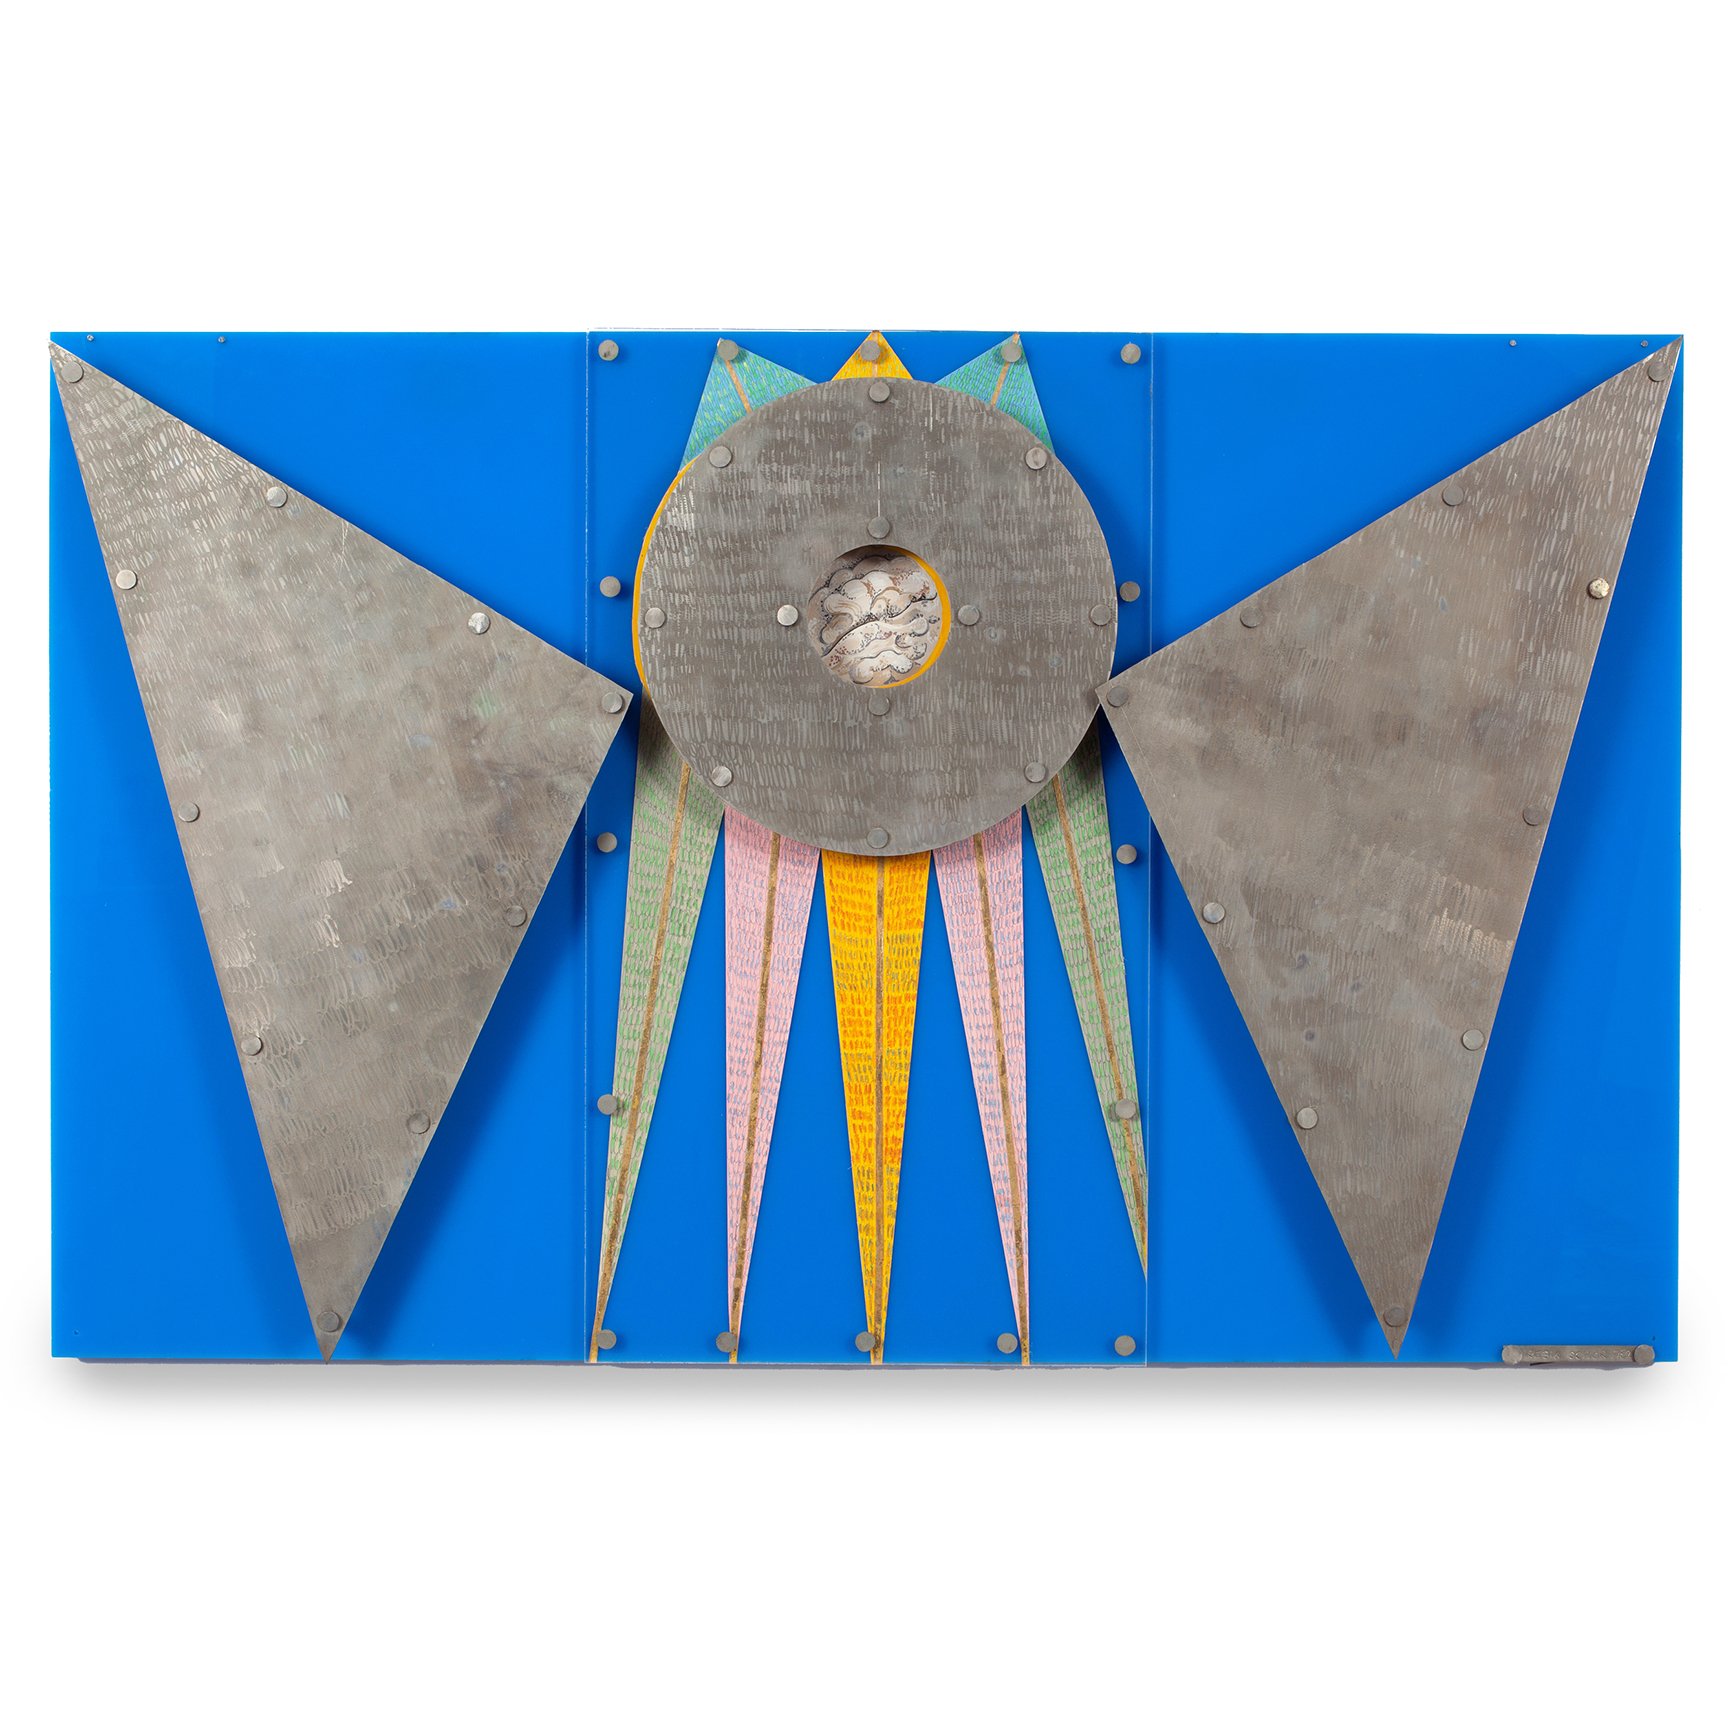   Untitled (Emblem and Creation),  1982, gouache on paper, white metal, blue Plexiglas, 24 x 36 in 